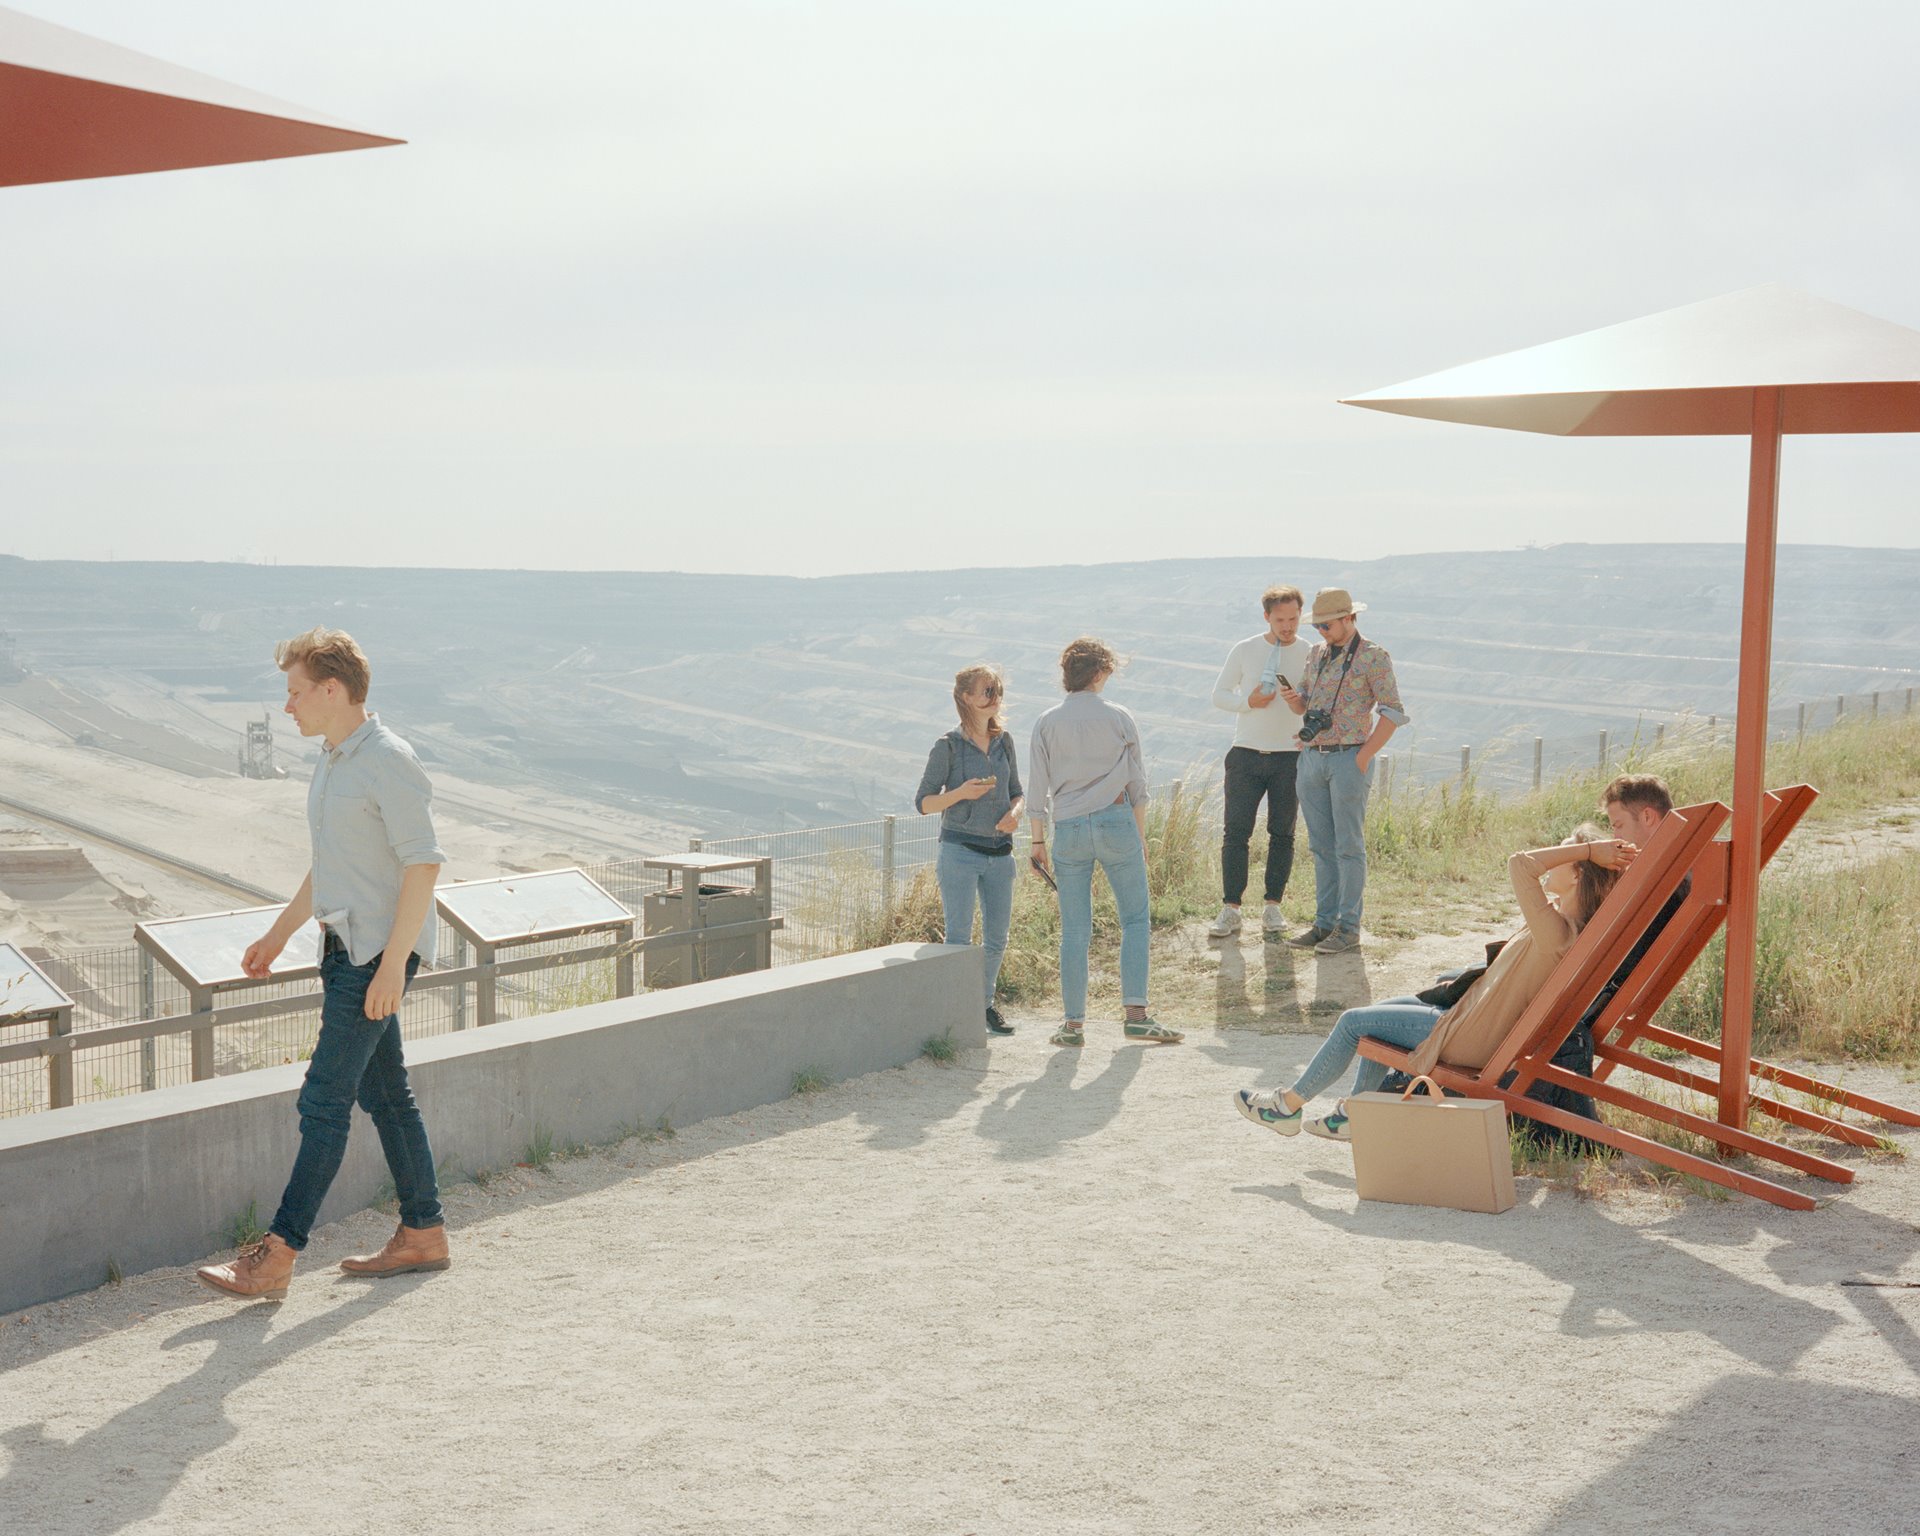 The Terra Nova viewing platform, built by energy company RWE, offers visitors a view over the Hambach open-cast mine, near Elsdorf, Germany.